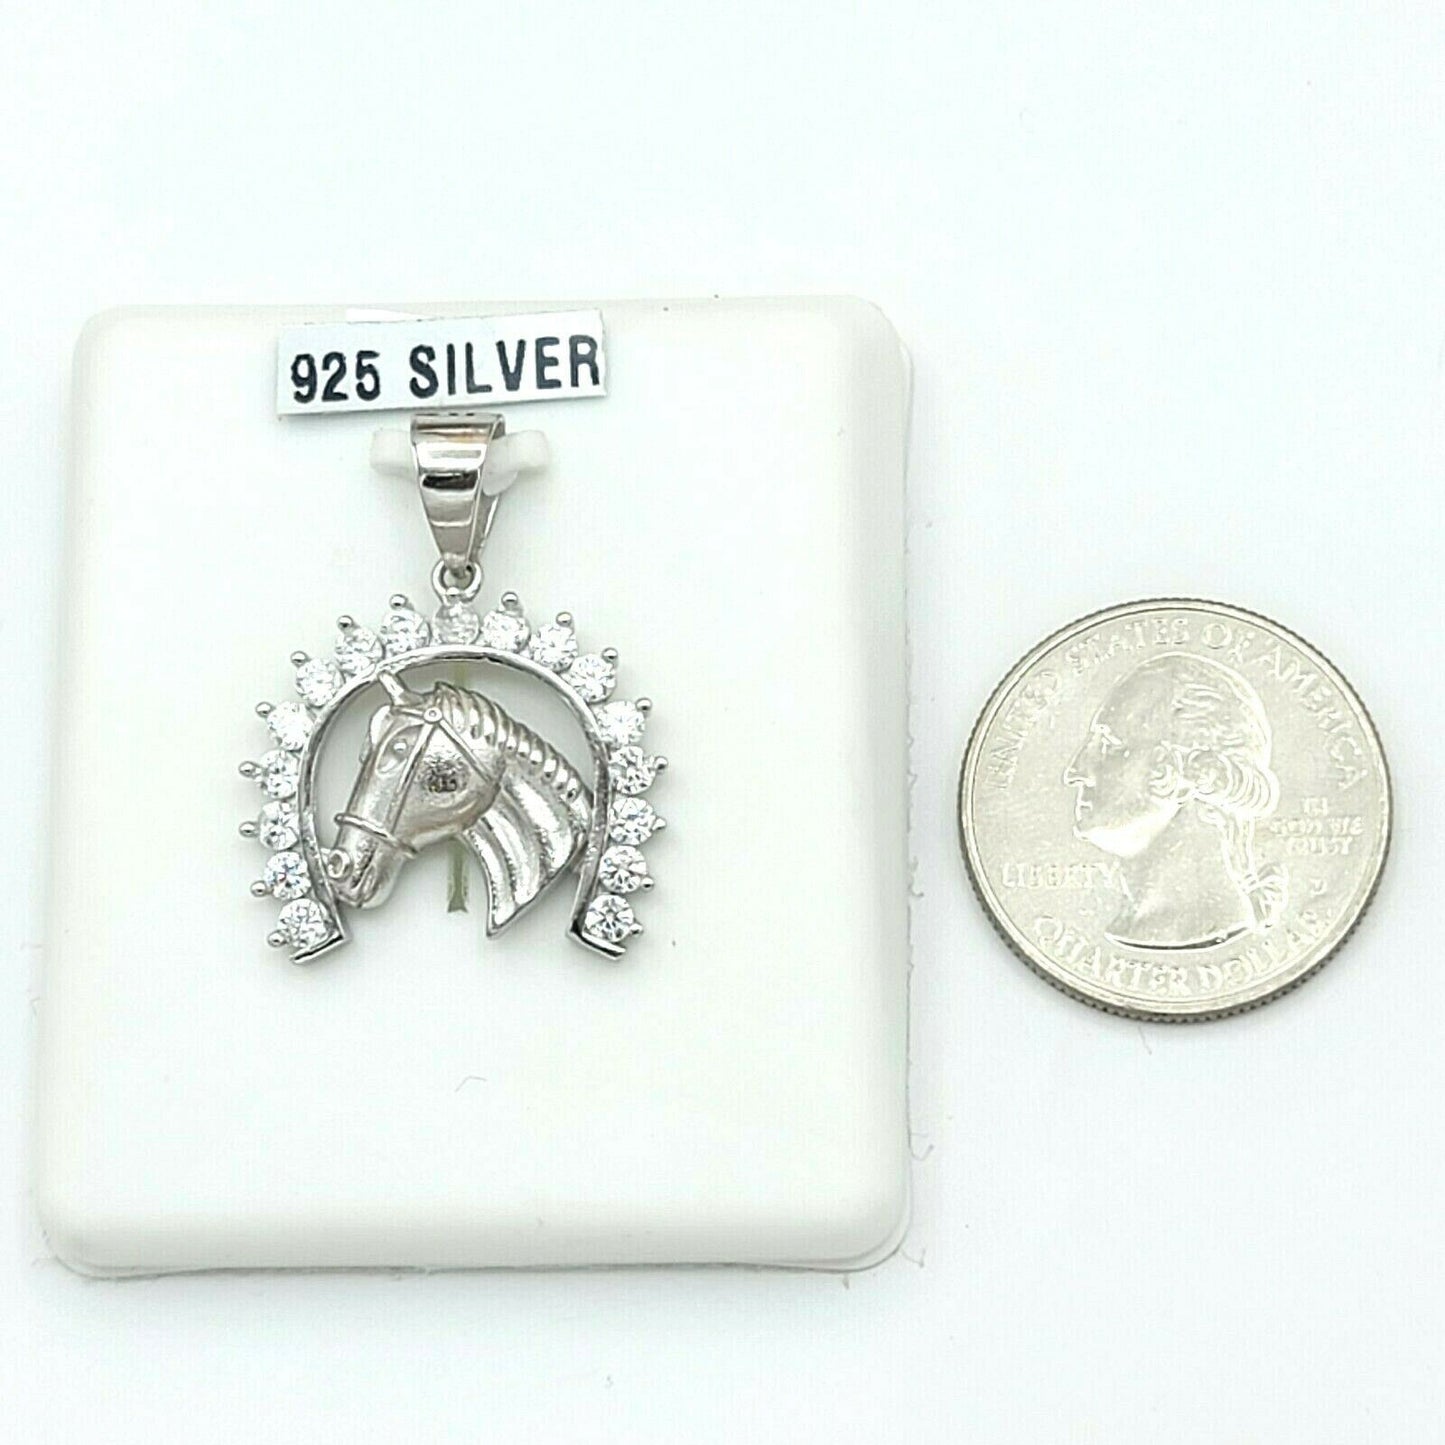 Solid 925 Sterling Silver. Horse Shoe Talisman Pendant with Optional Chain. Horse Head